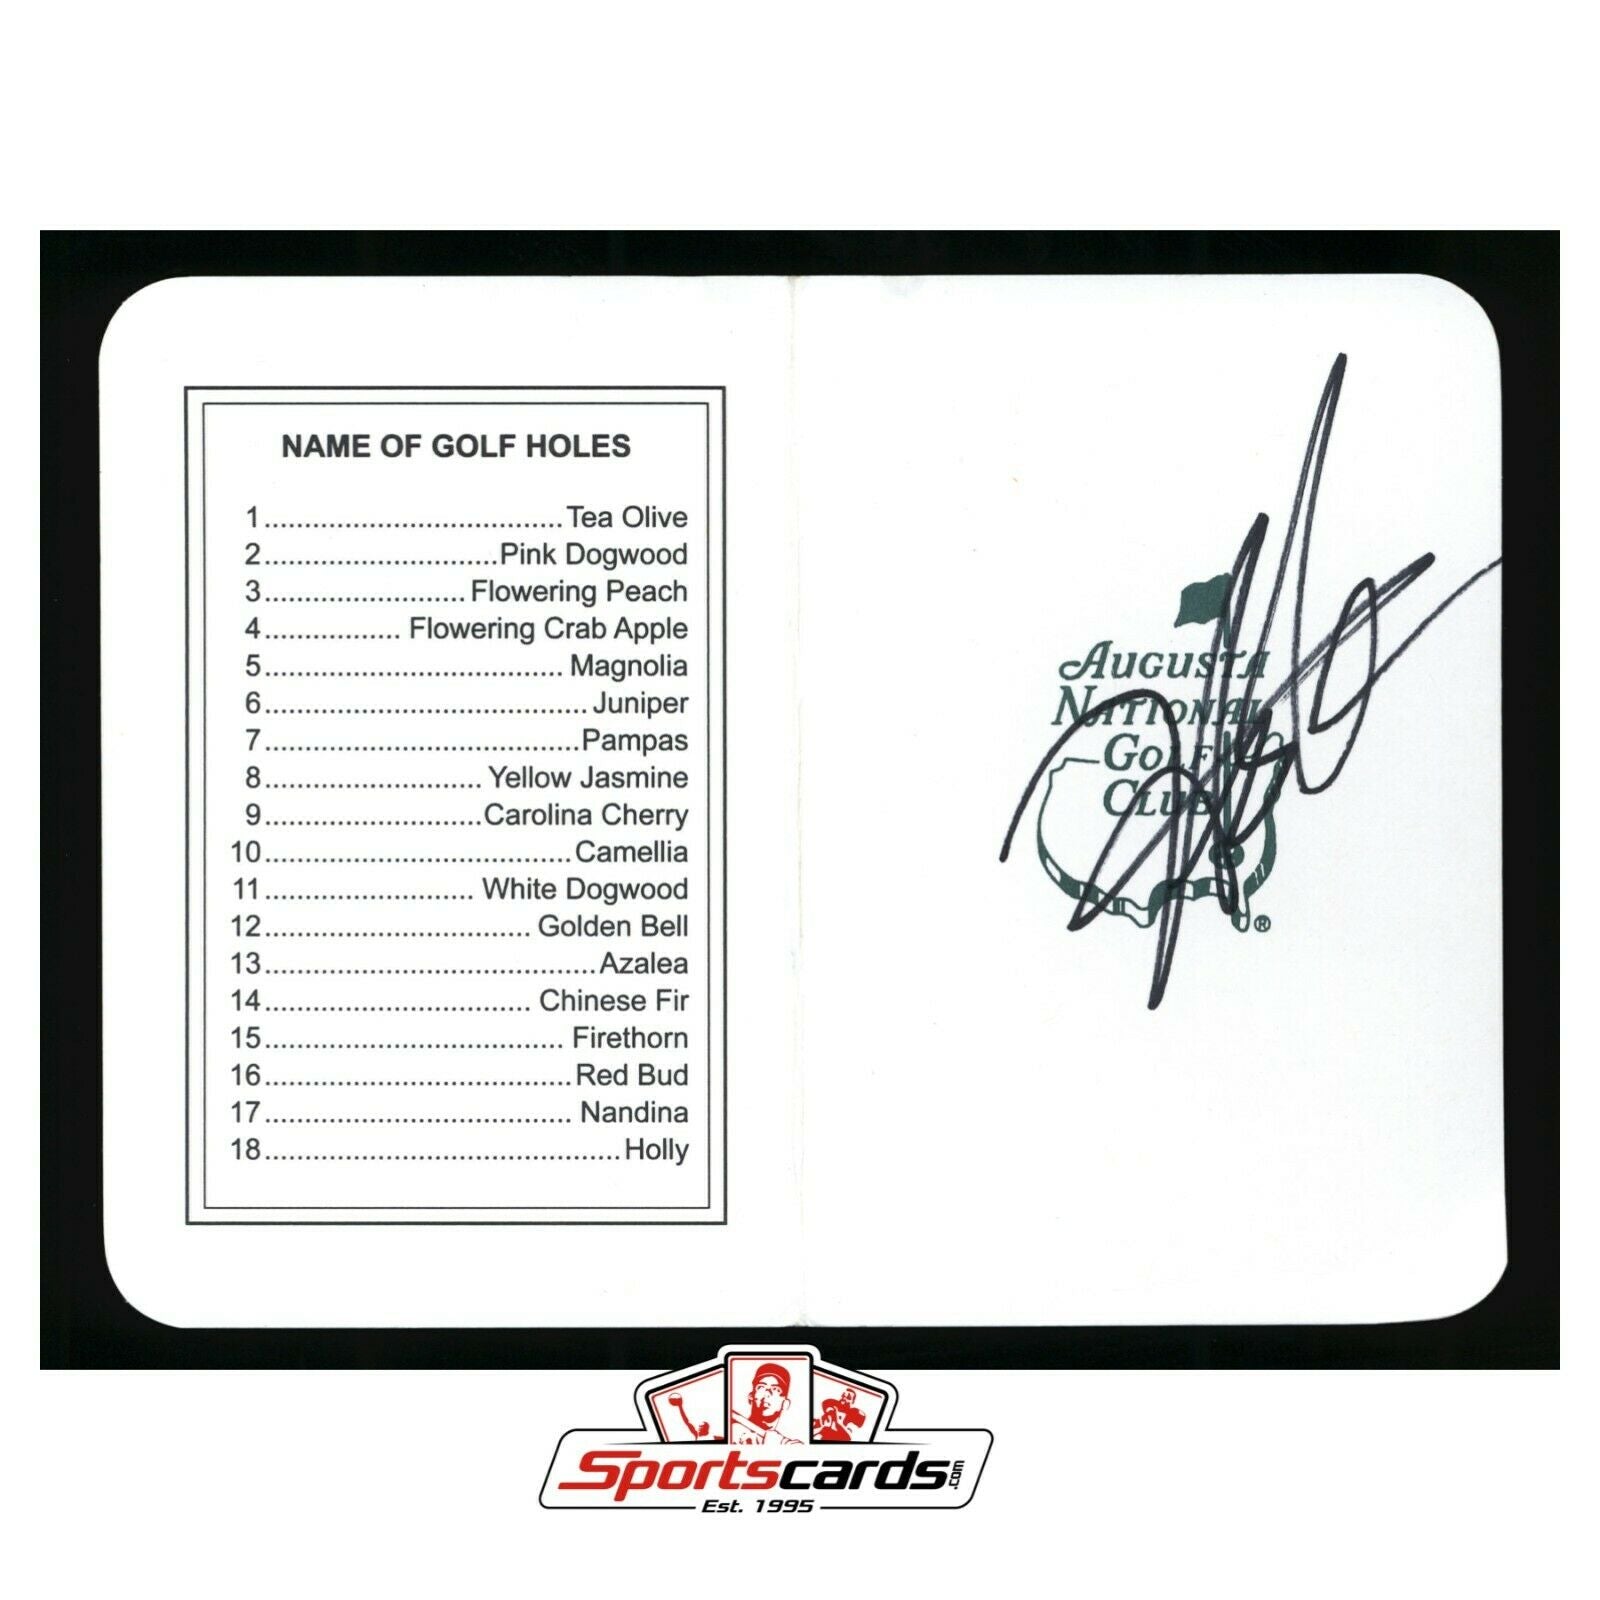 Hunter Mahan Signed Autographed Augusta National MASTERS Score Card BAS Beckett